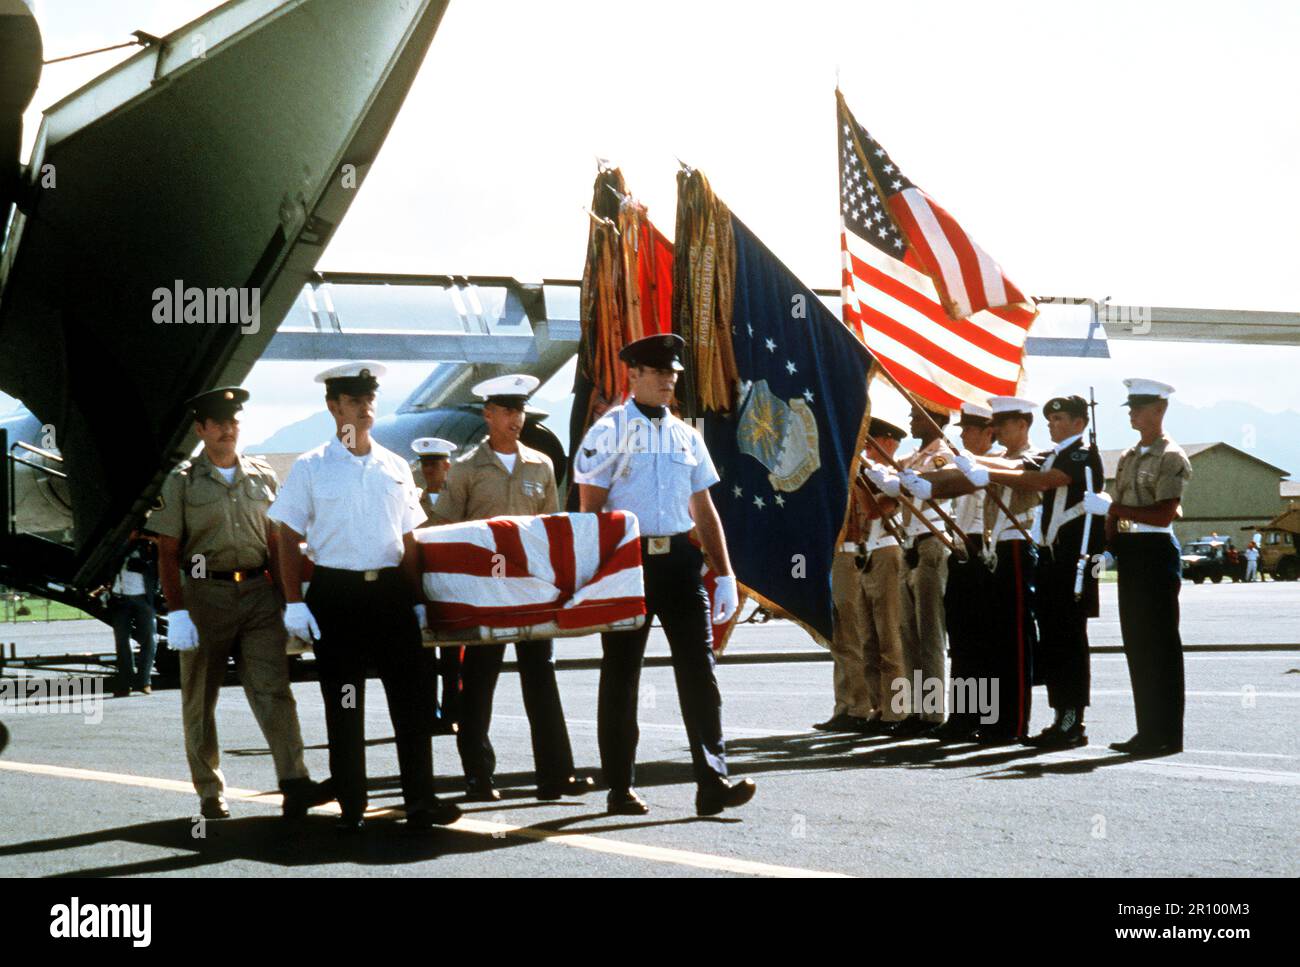 Joint-service pallbearers transfer flag-draped coffins of missing in action (MIA) soldiers to buses upon the arrival in Hawaii of the airlift returning them from Vietnam. Stock Photo